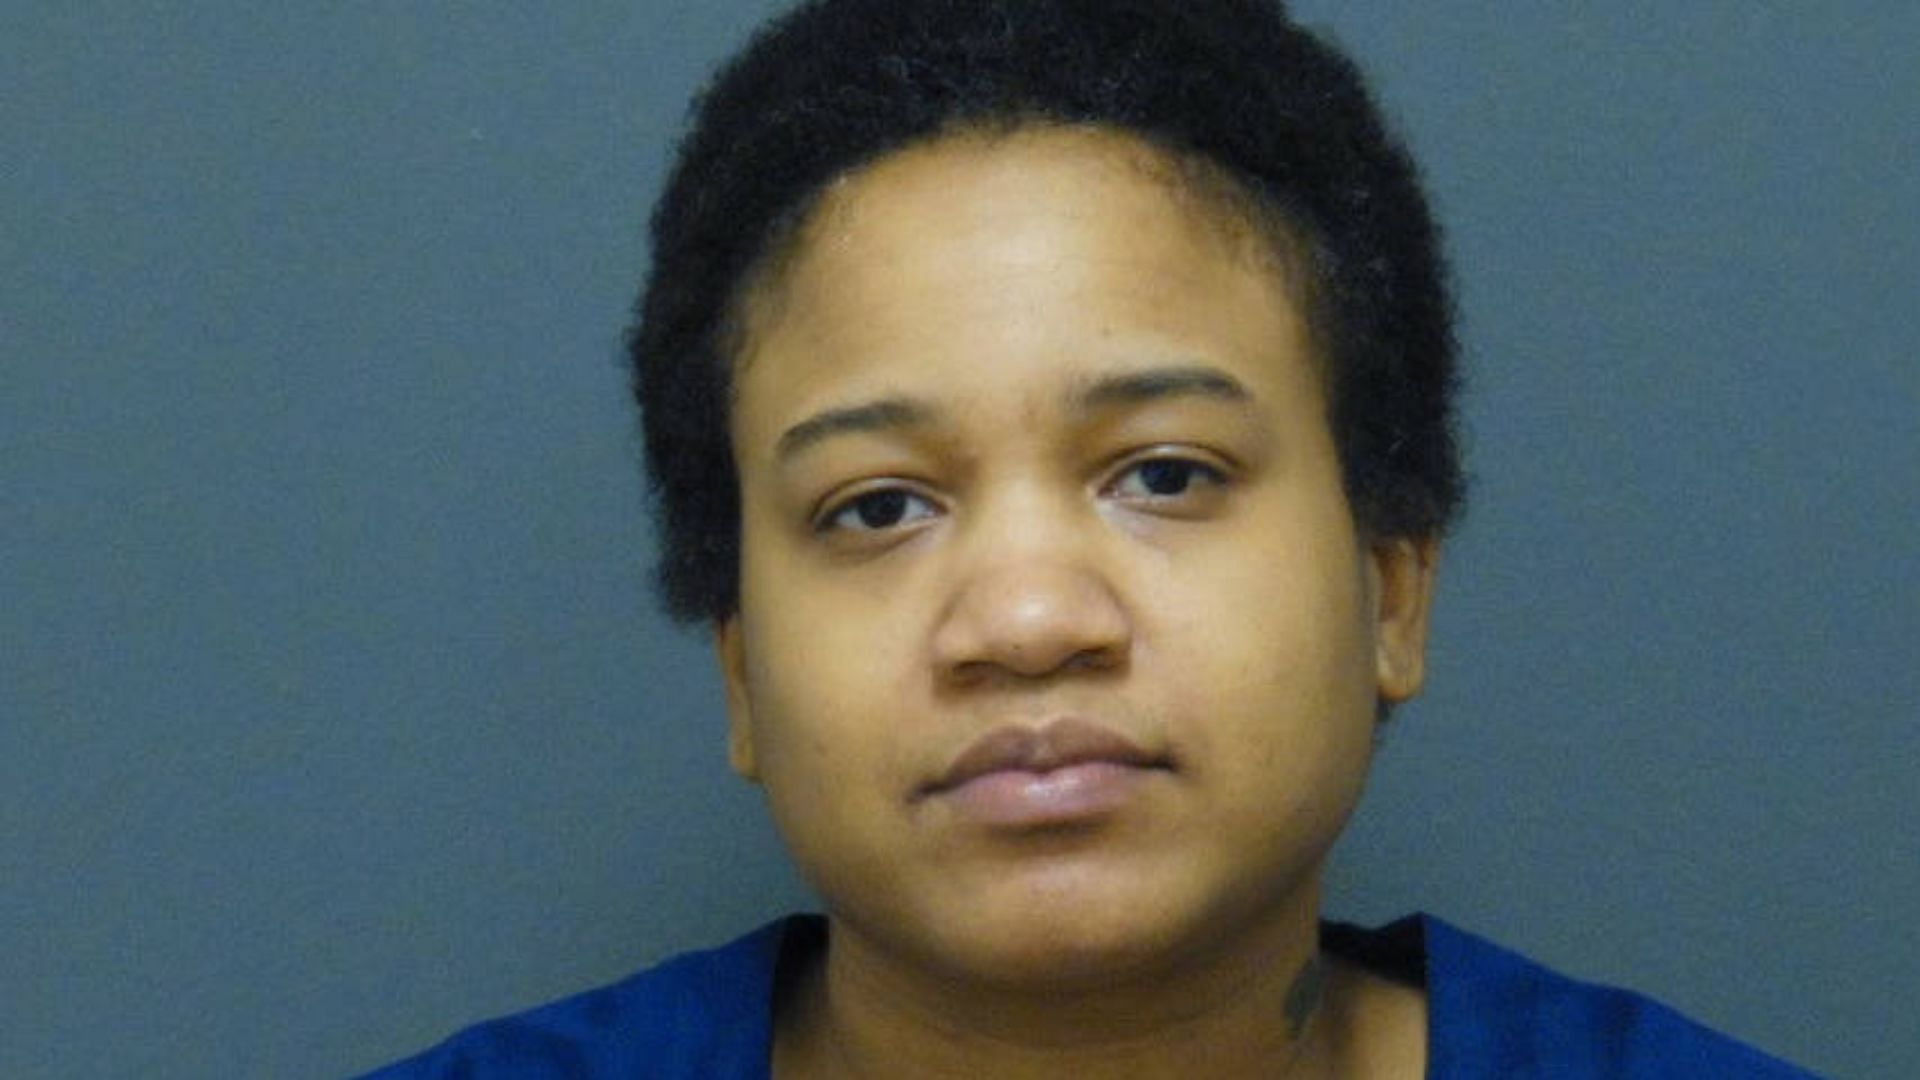 Blair was convicted of first-degree murder and was sentenced to life-imprisonment. She is currently serving her sentence at the Huron Valley Correctional Facility in Michigan.